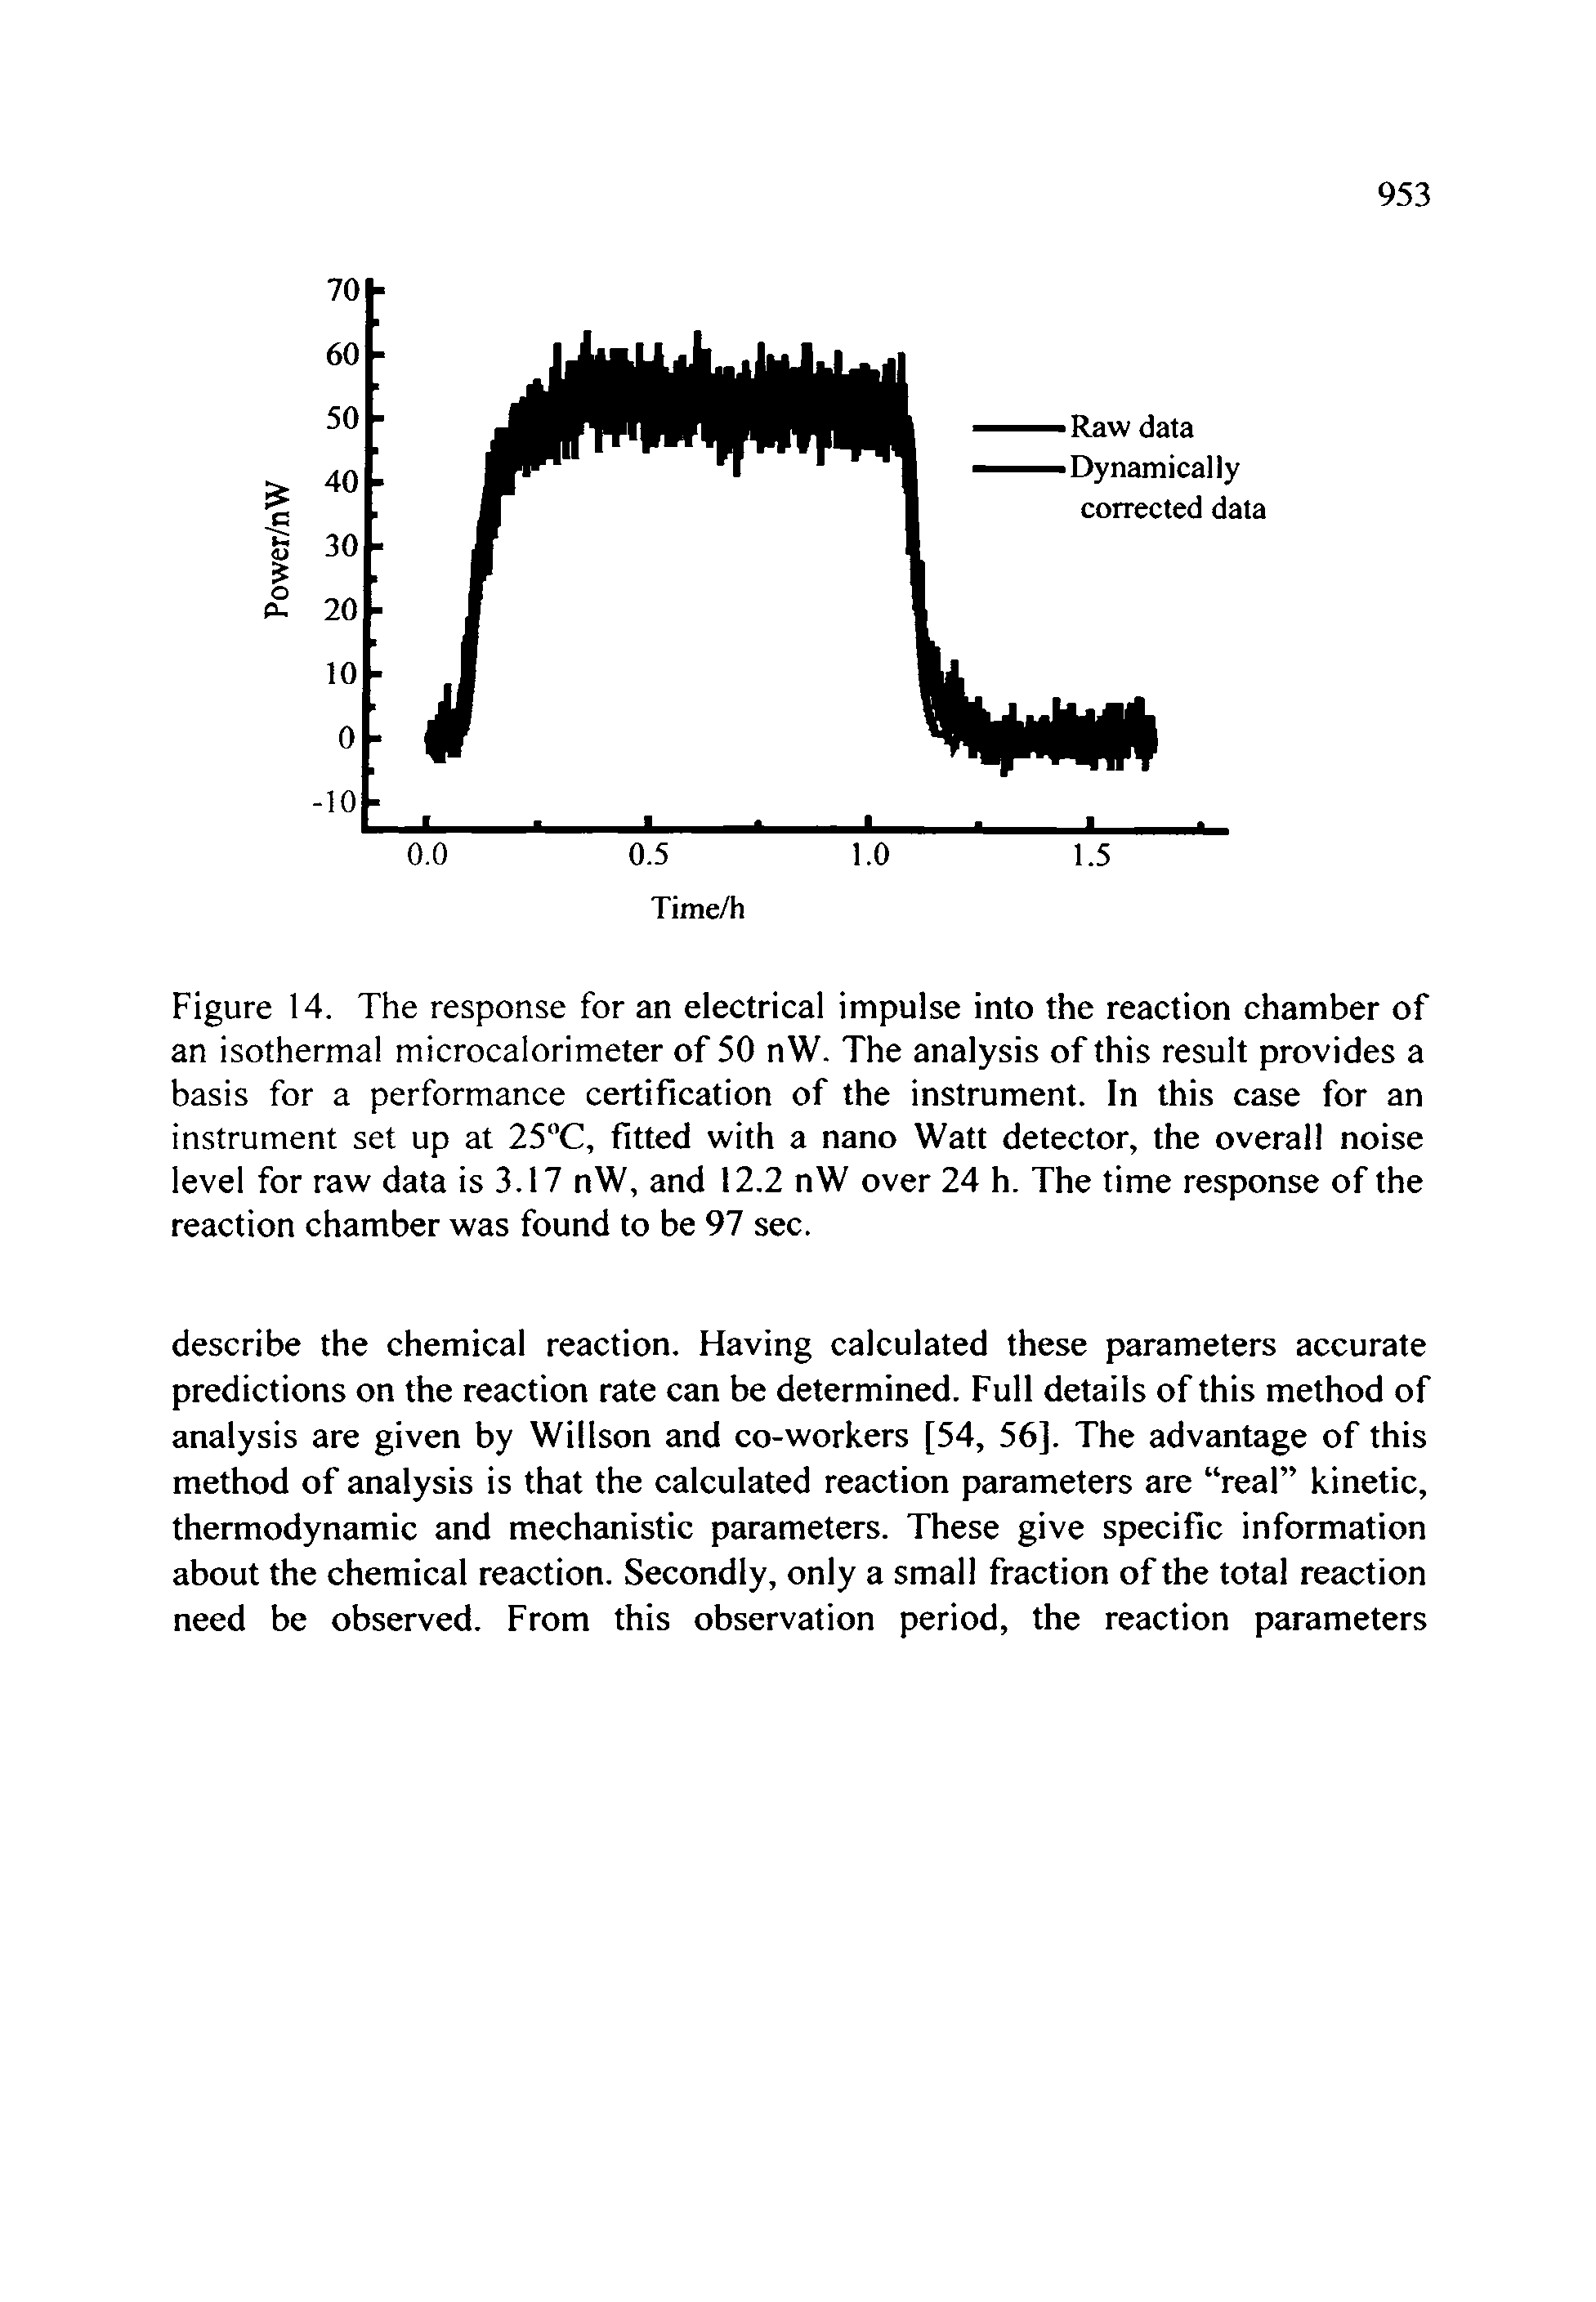 Figure 14. The response for an electrical impulse into the reaction chamber of an isothermal microcalorimeter of 50 nW. The analysis of this result provides a basis for a performance certification of the instrument. In this case for an instrument set up at 25 C, fitted with a nano Watt detector, the overall noise level for raw data is 3.17 nW, and 12.2 nW over 24 h. The time response of the reaction chamber was found to be 97 sec.